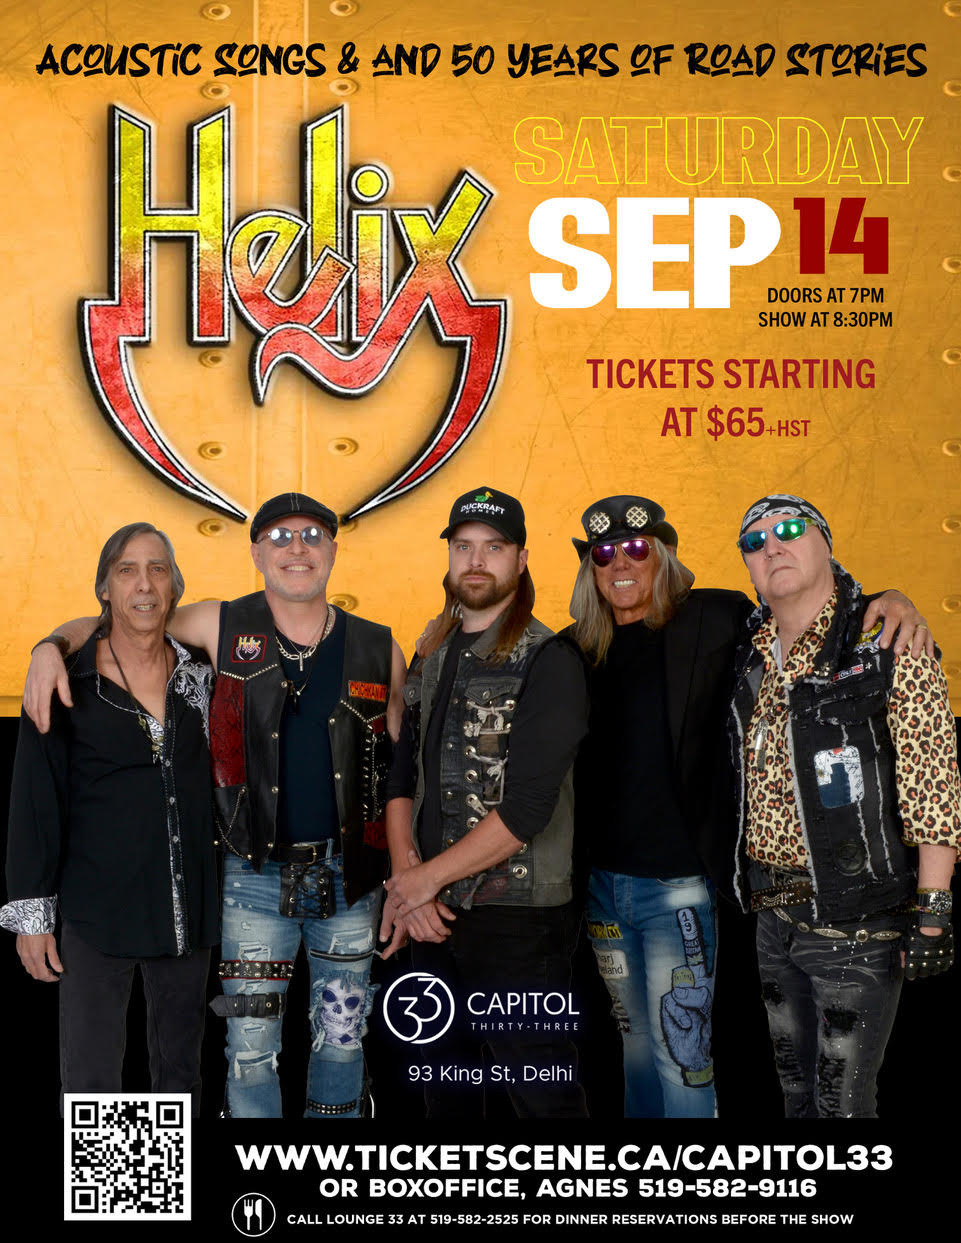 Helix:  Acoustic Songs & and 50 years of Road Stories